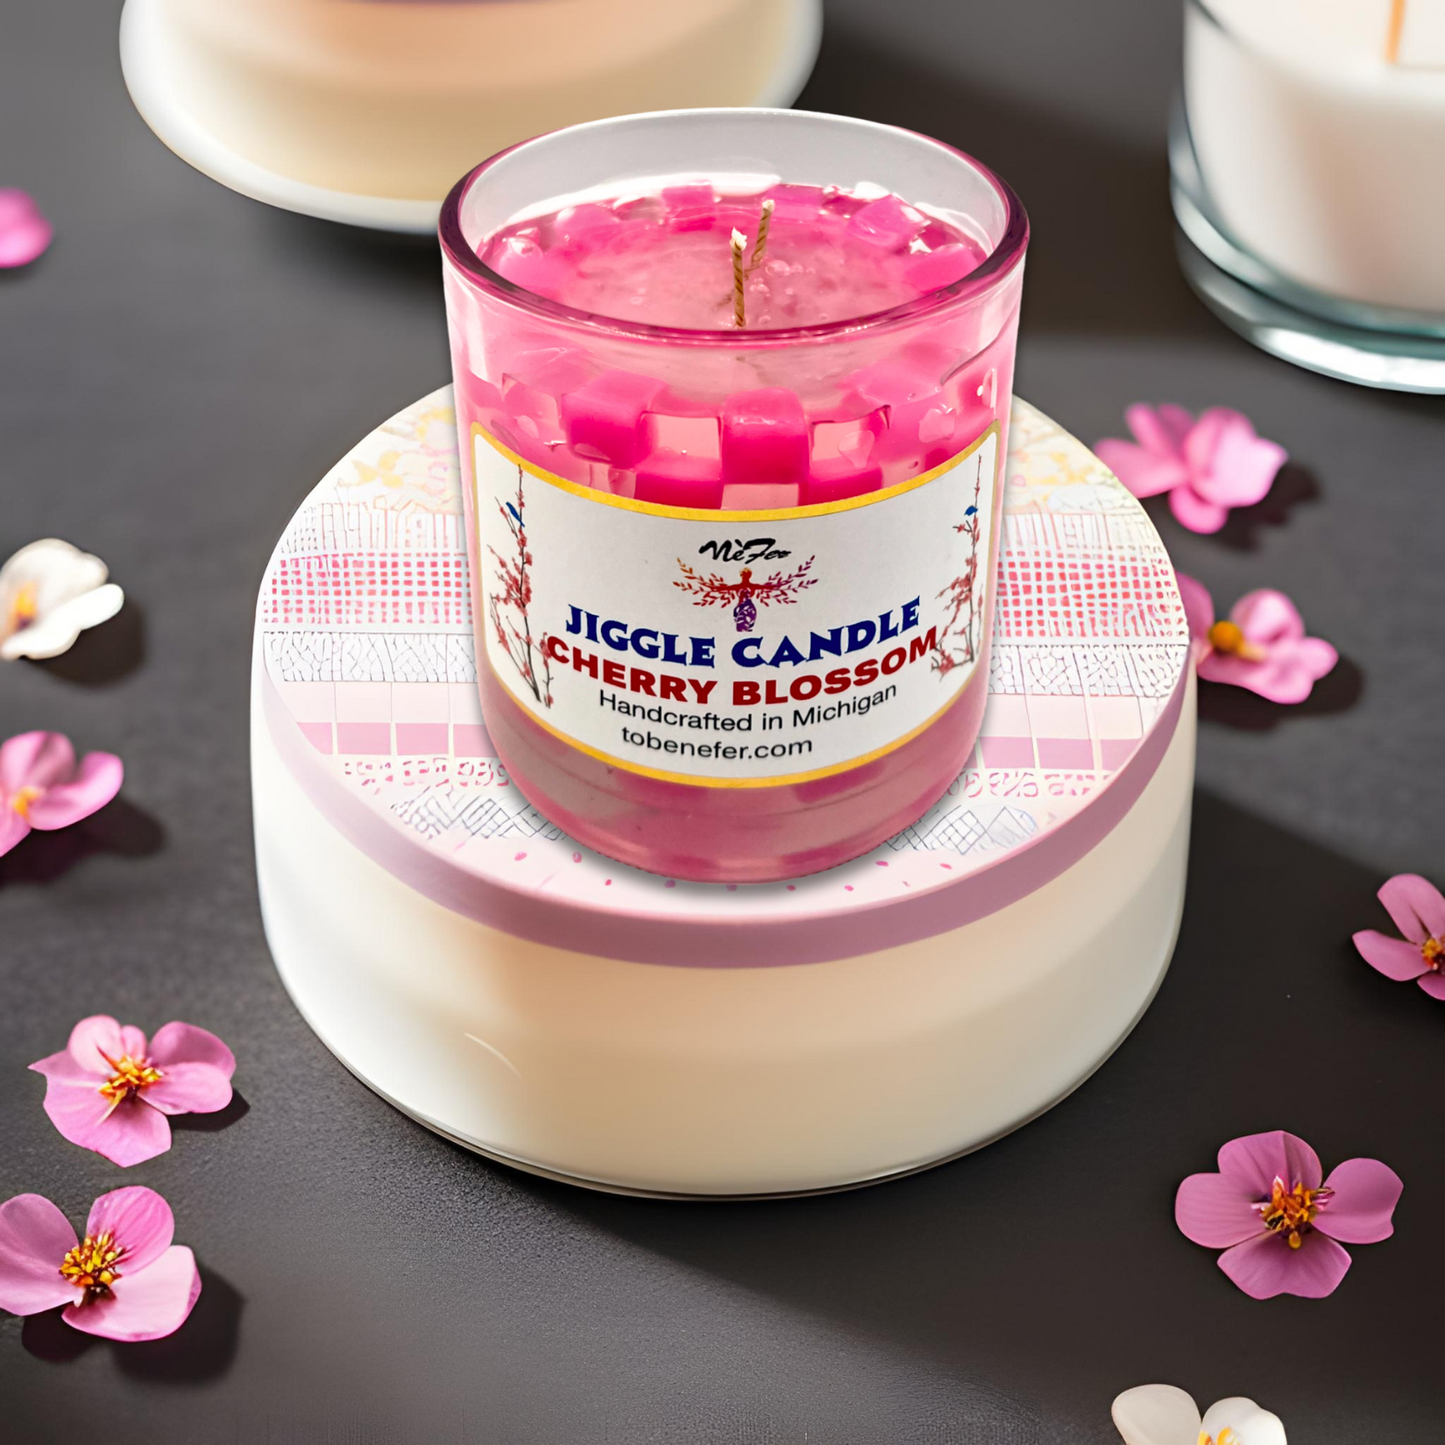 Cherry Blossom Checkered Jiggle Candle